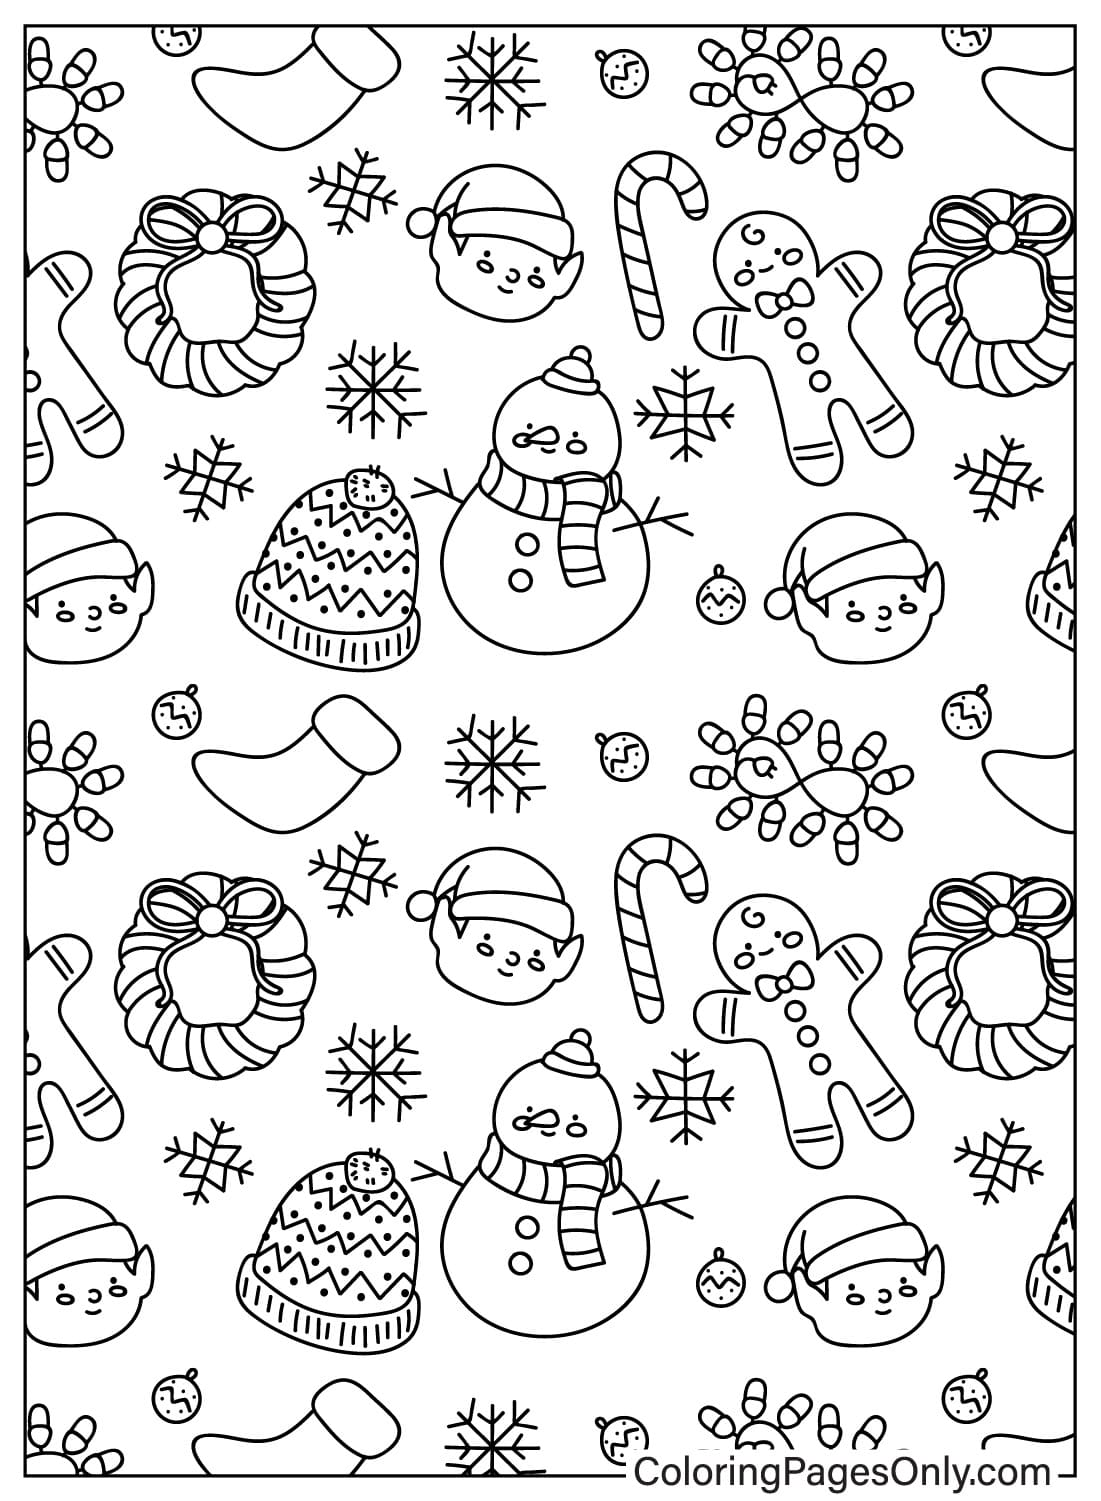 Christmas Pattern Coloring Pages to Download from Christmas Pattern